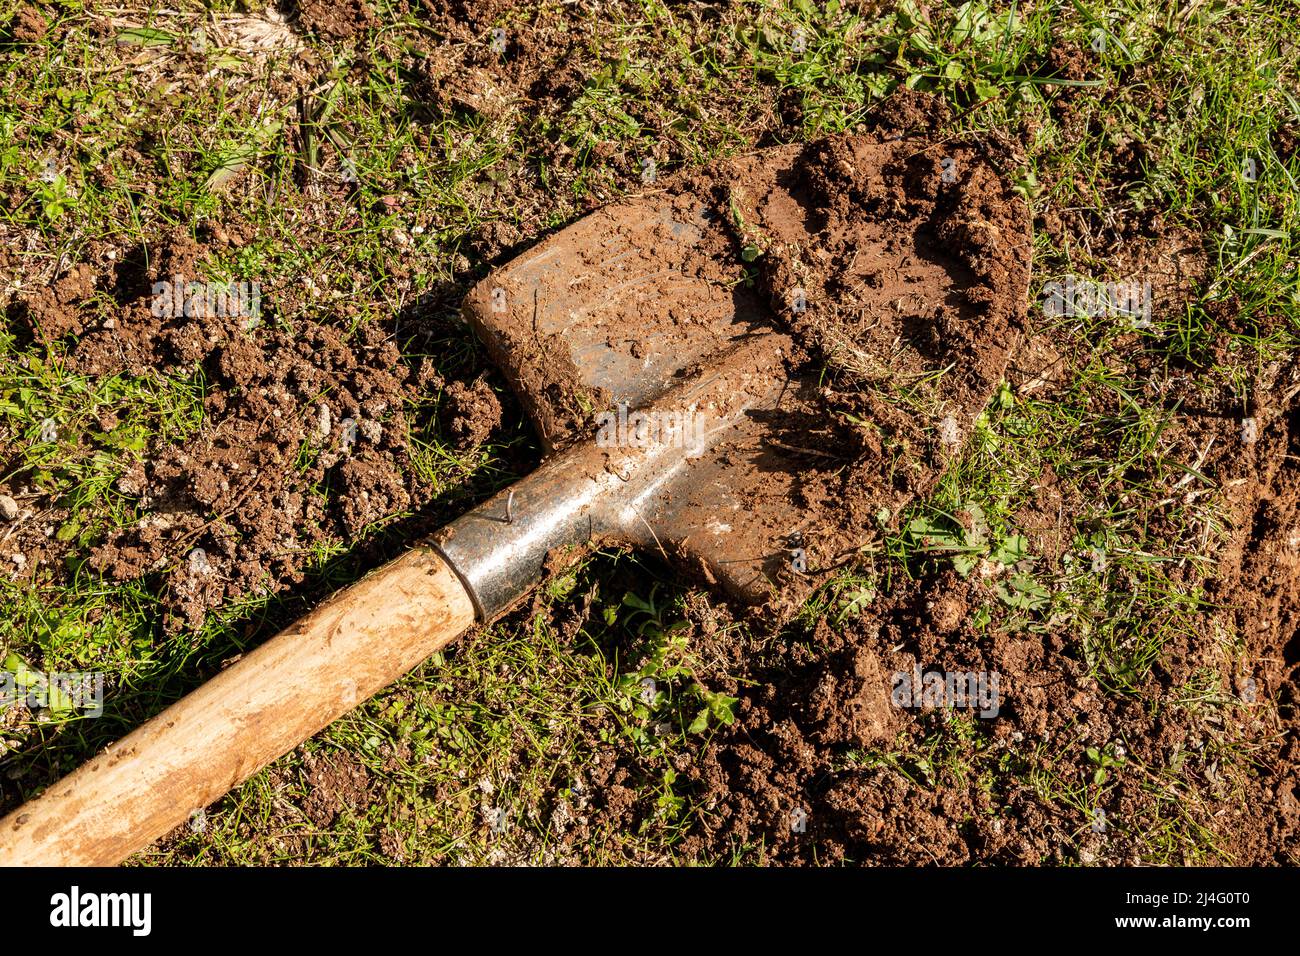 Used farming shovel with soil on it. Gardening, spring, agriculture concept. Stock Photo